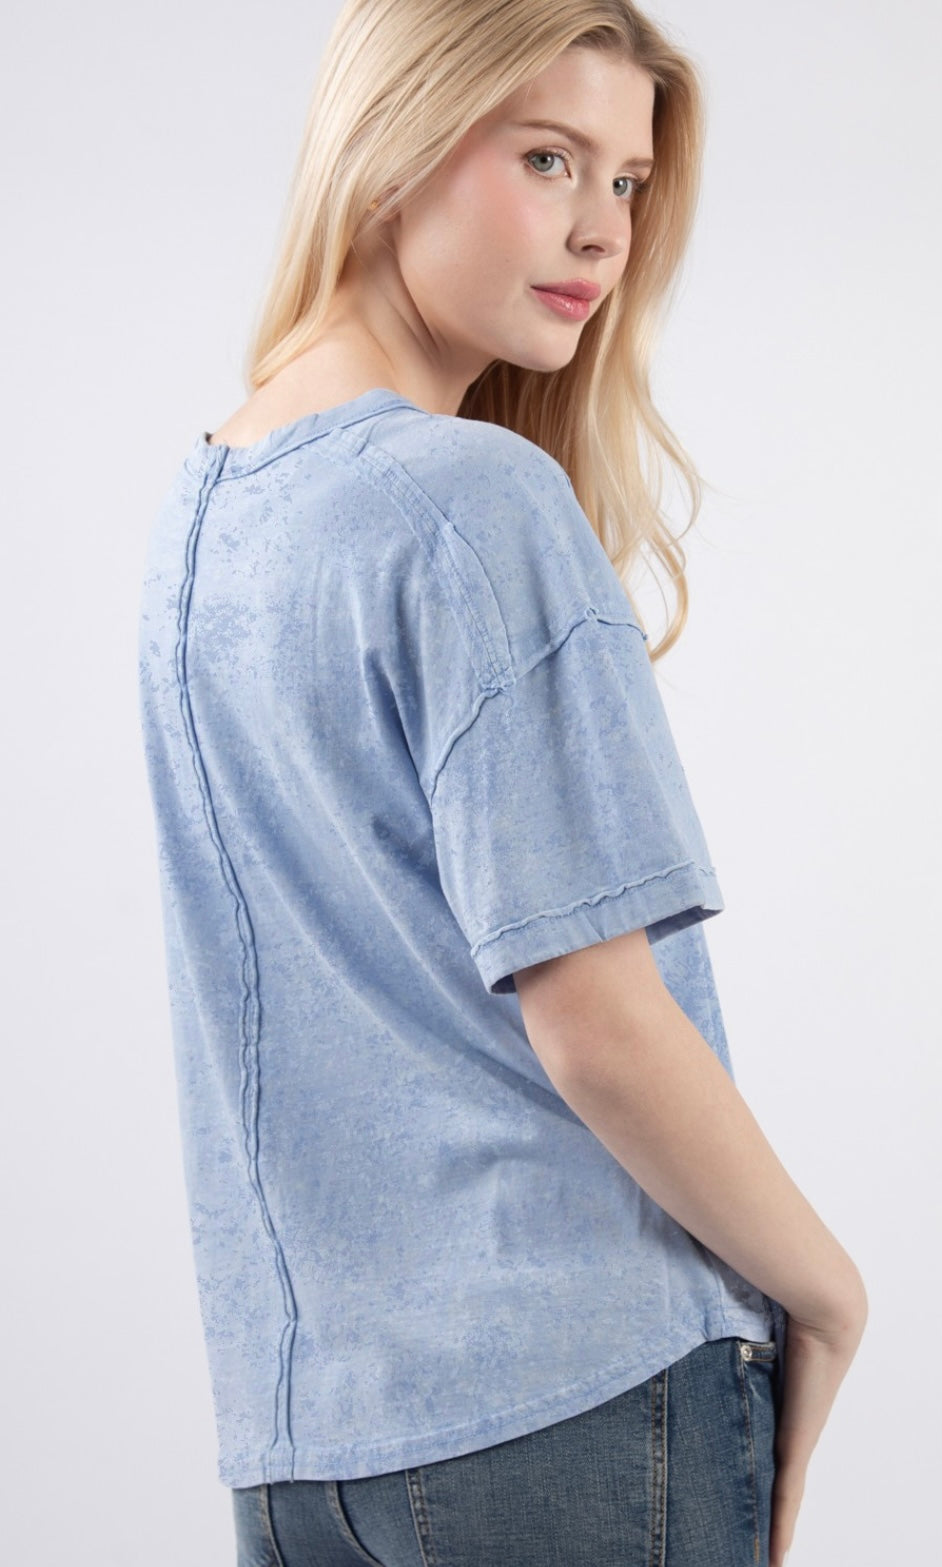 Mineral Washed Pocket Tee